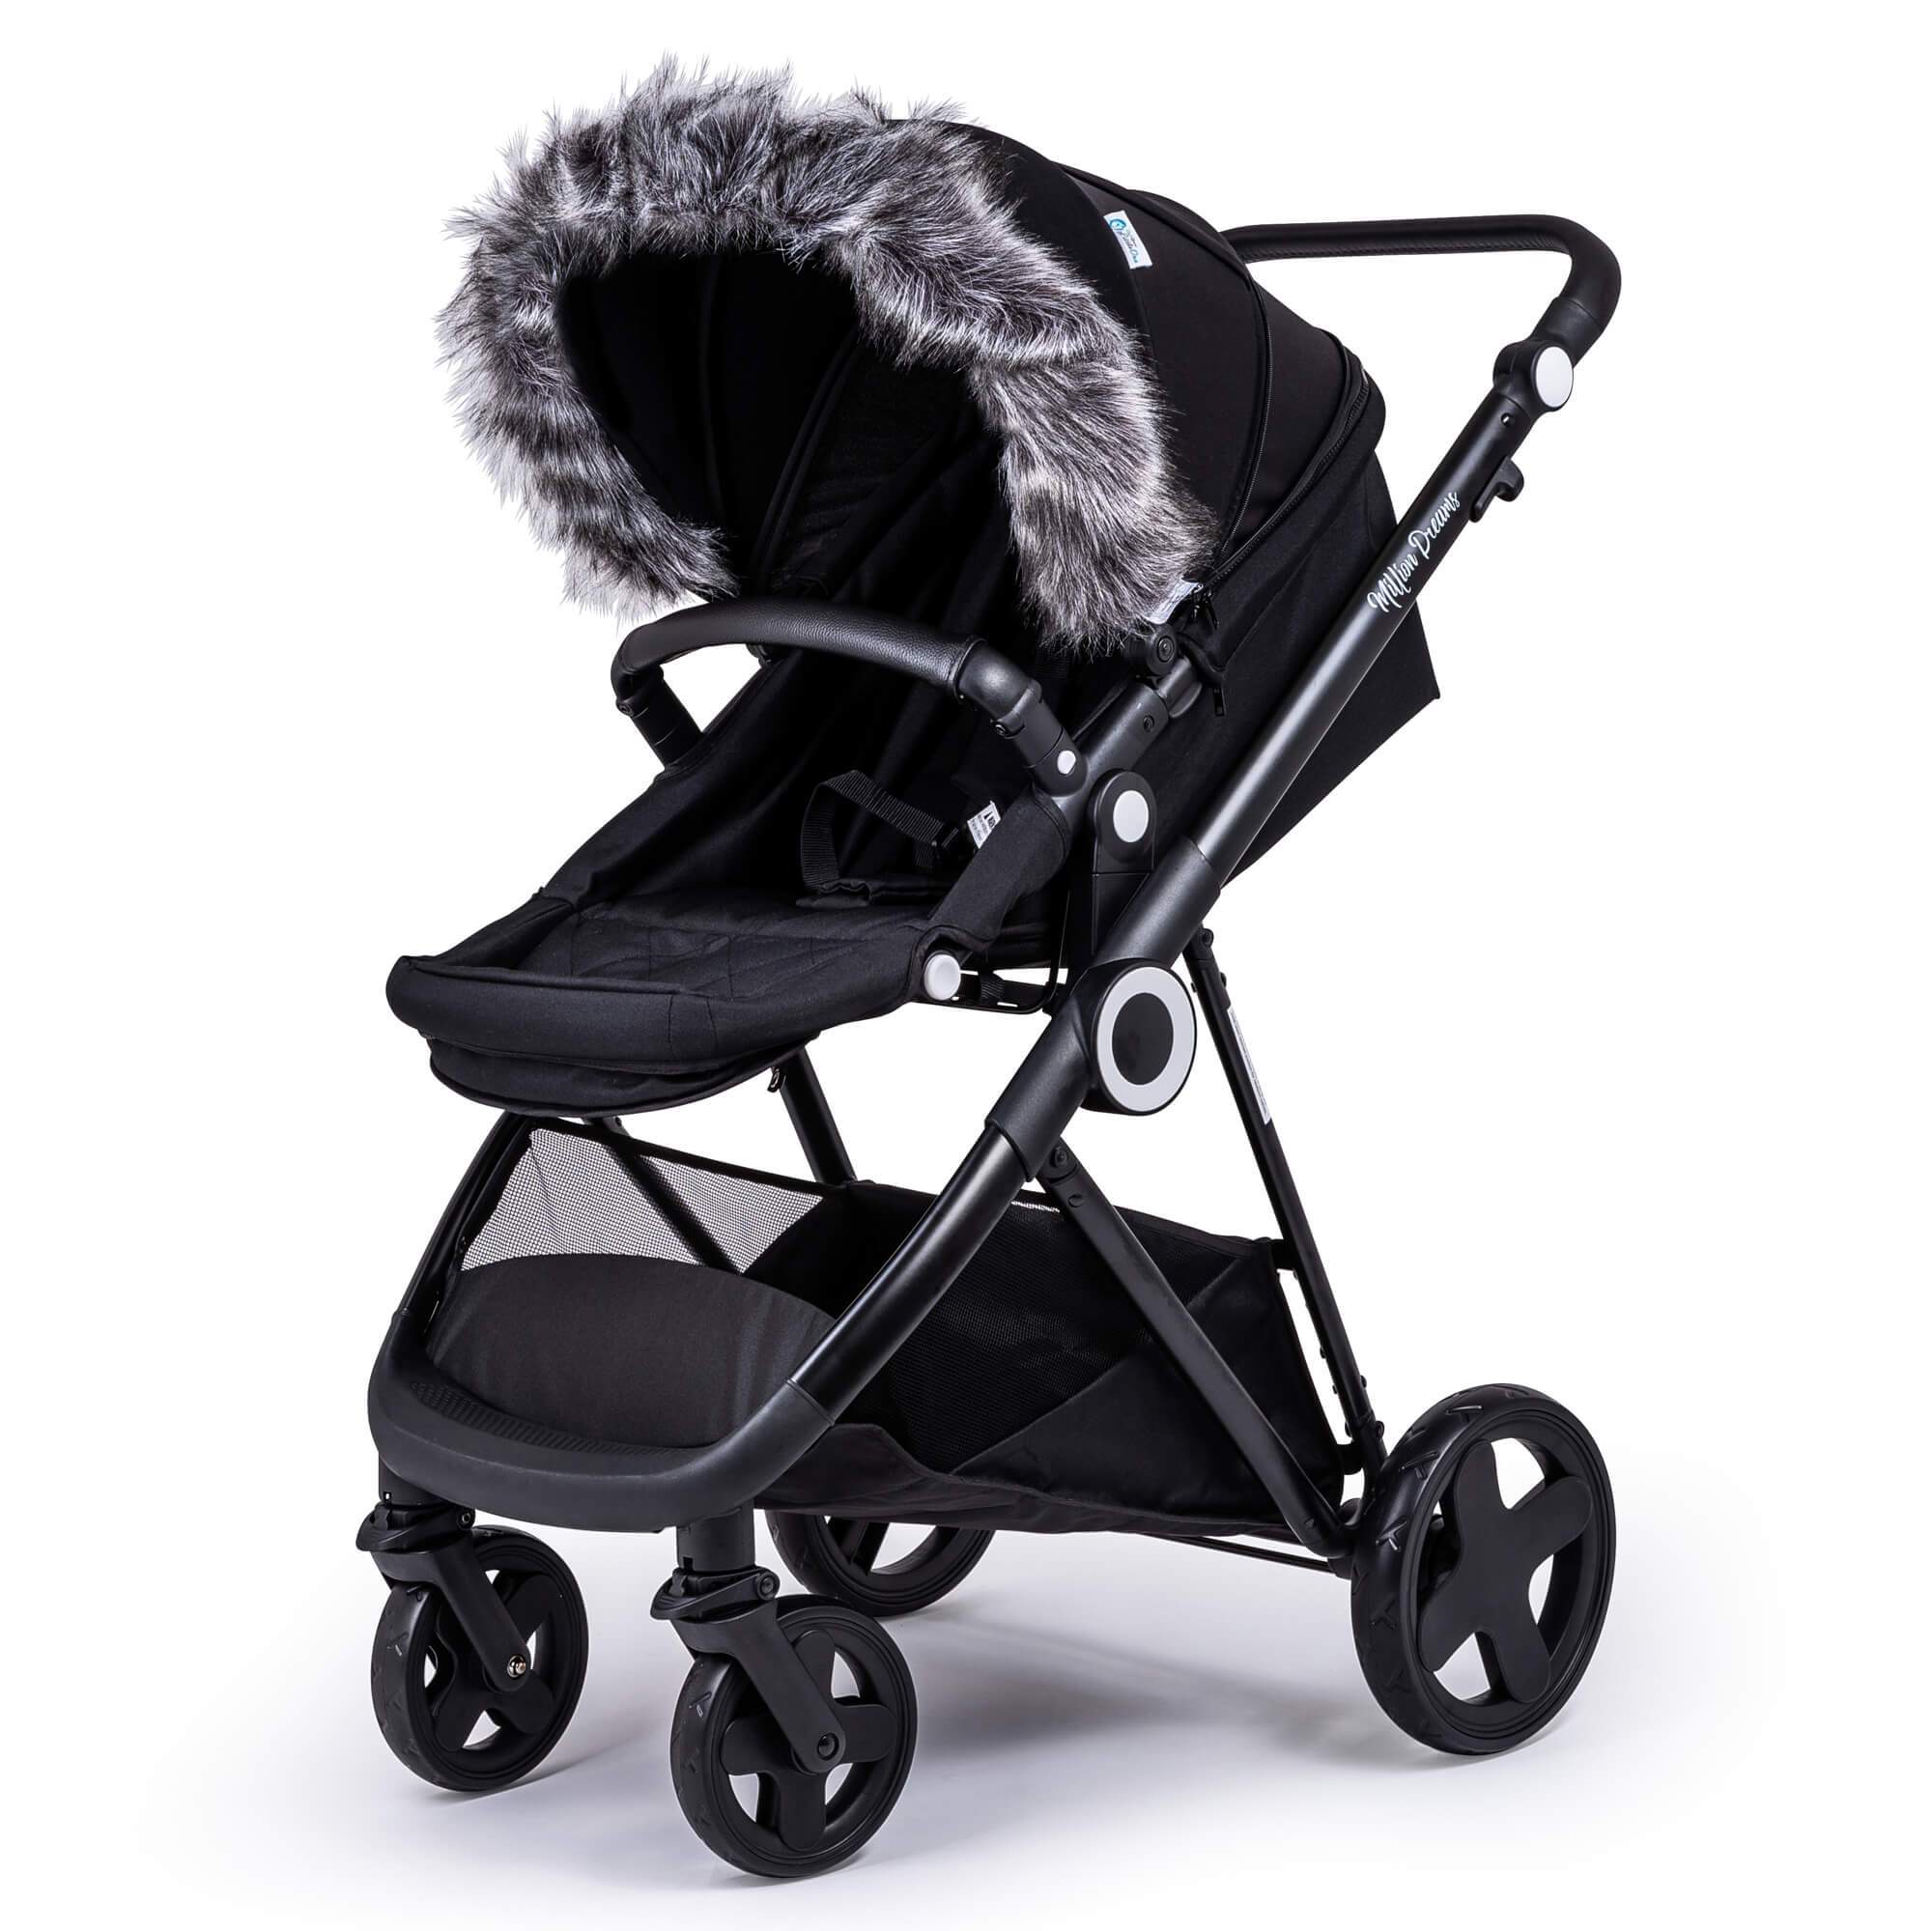 Pram Fur Hood Trim Attachment for Pushchair Compatible with Hartan - Dark Grey / Fits All Models | For Your Little One